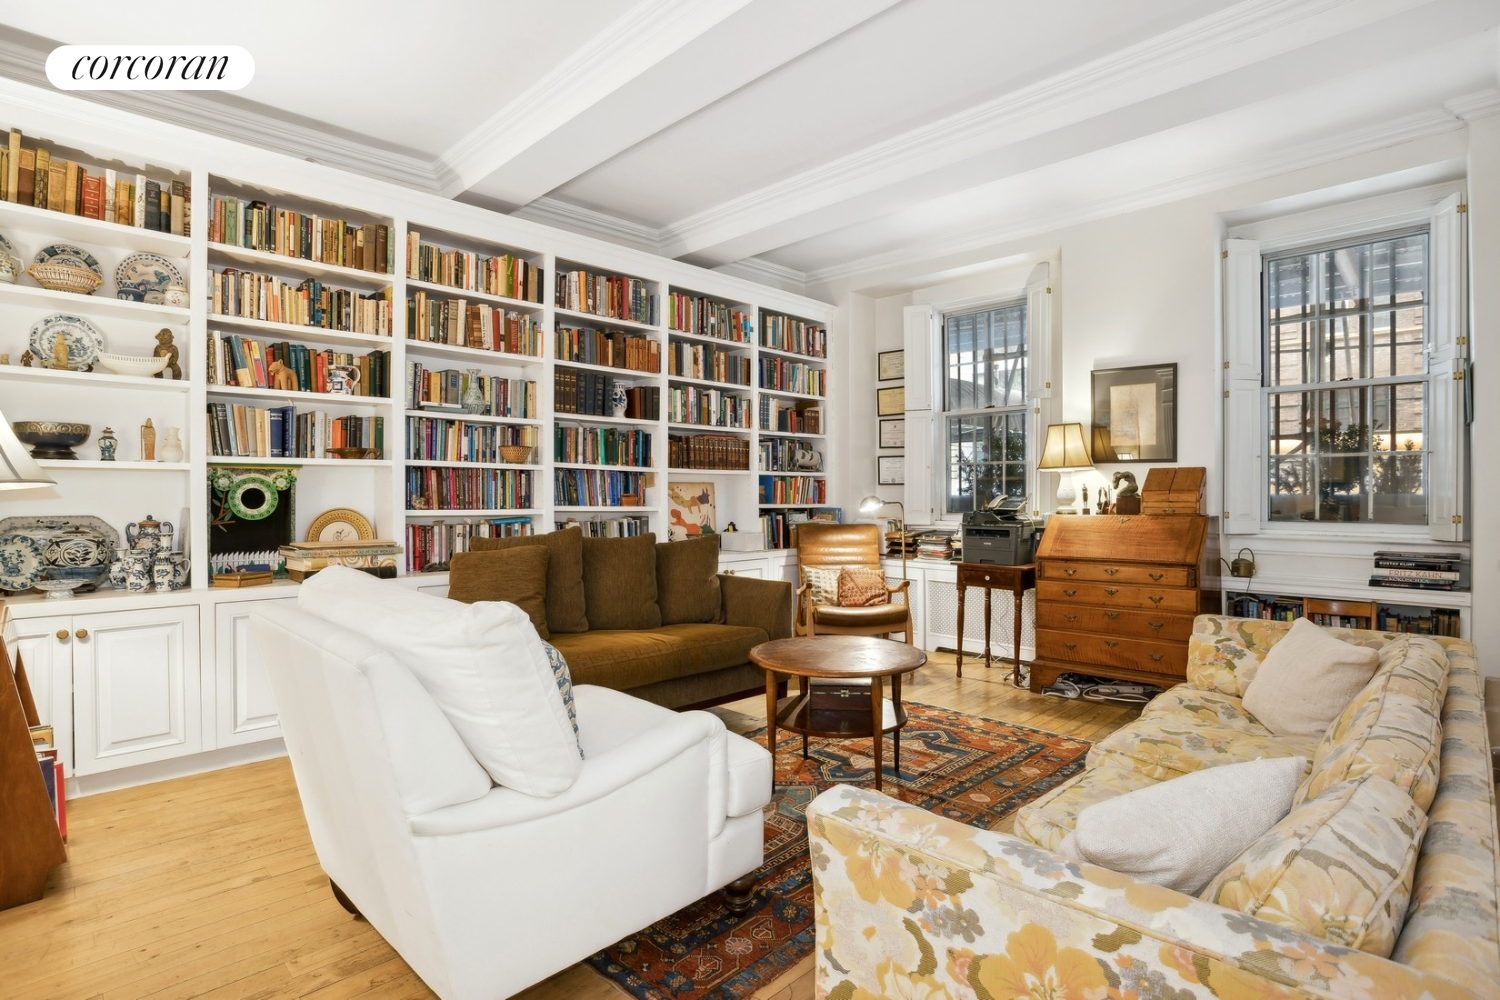 9 East 96th Street 1A, Carnegie Hill, Upper East Side, NYC - 2 Bedrooms  
1.5 Bathrooms  
5 Rooms - 